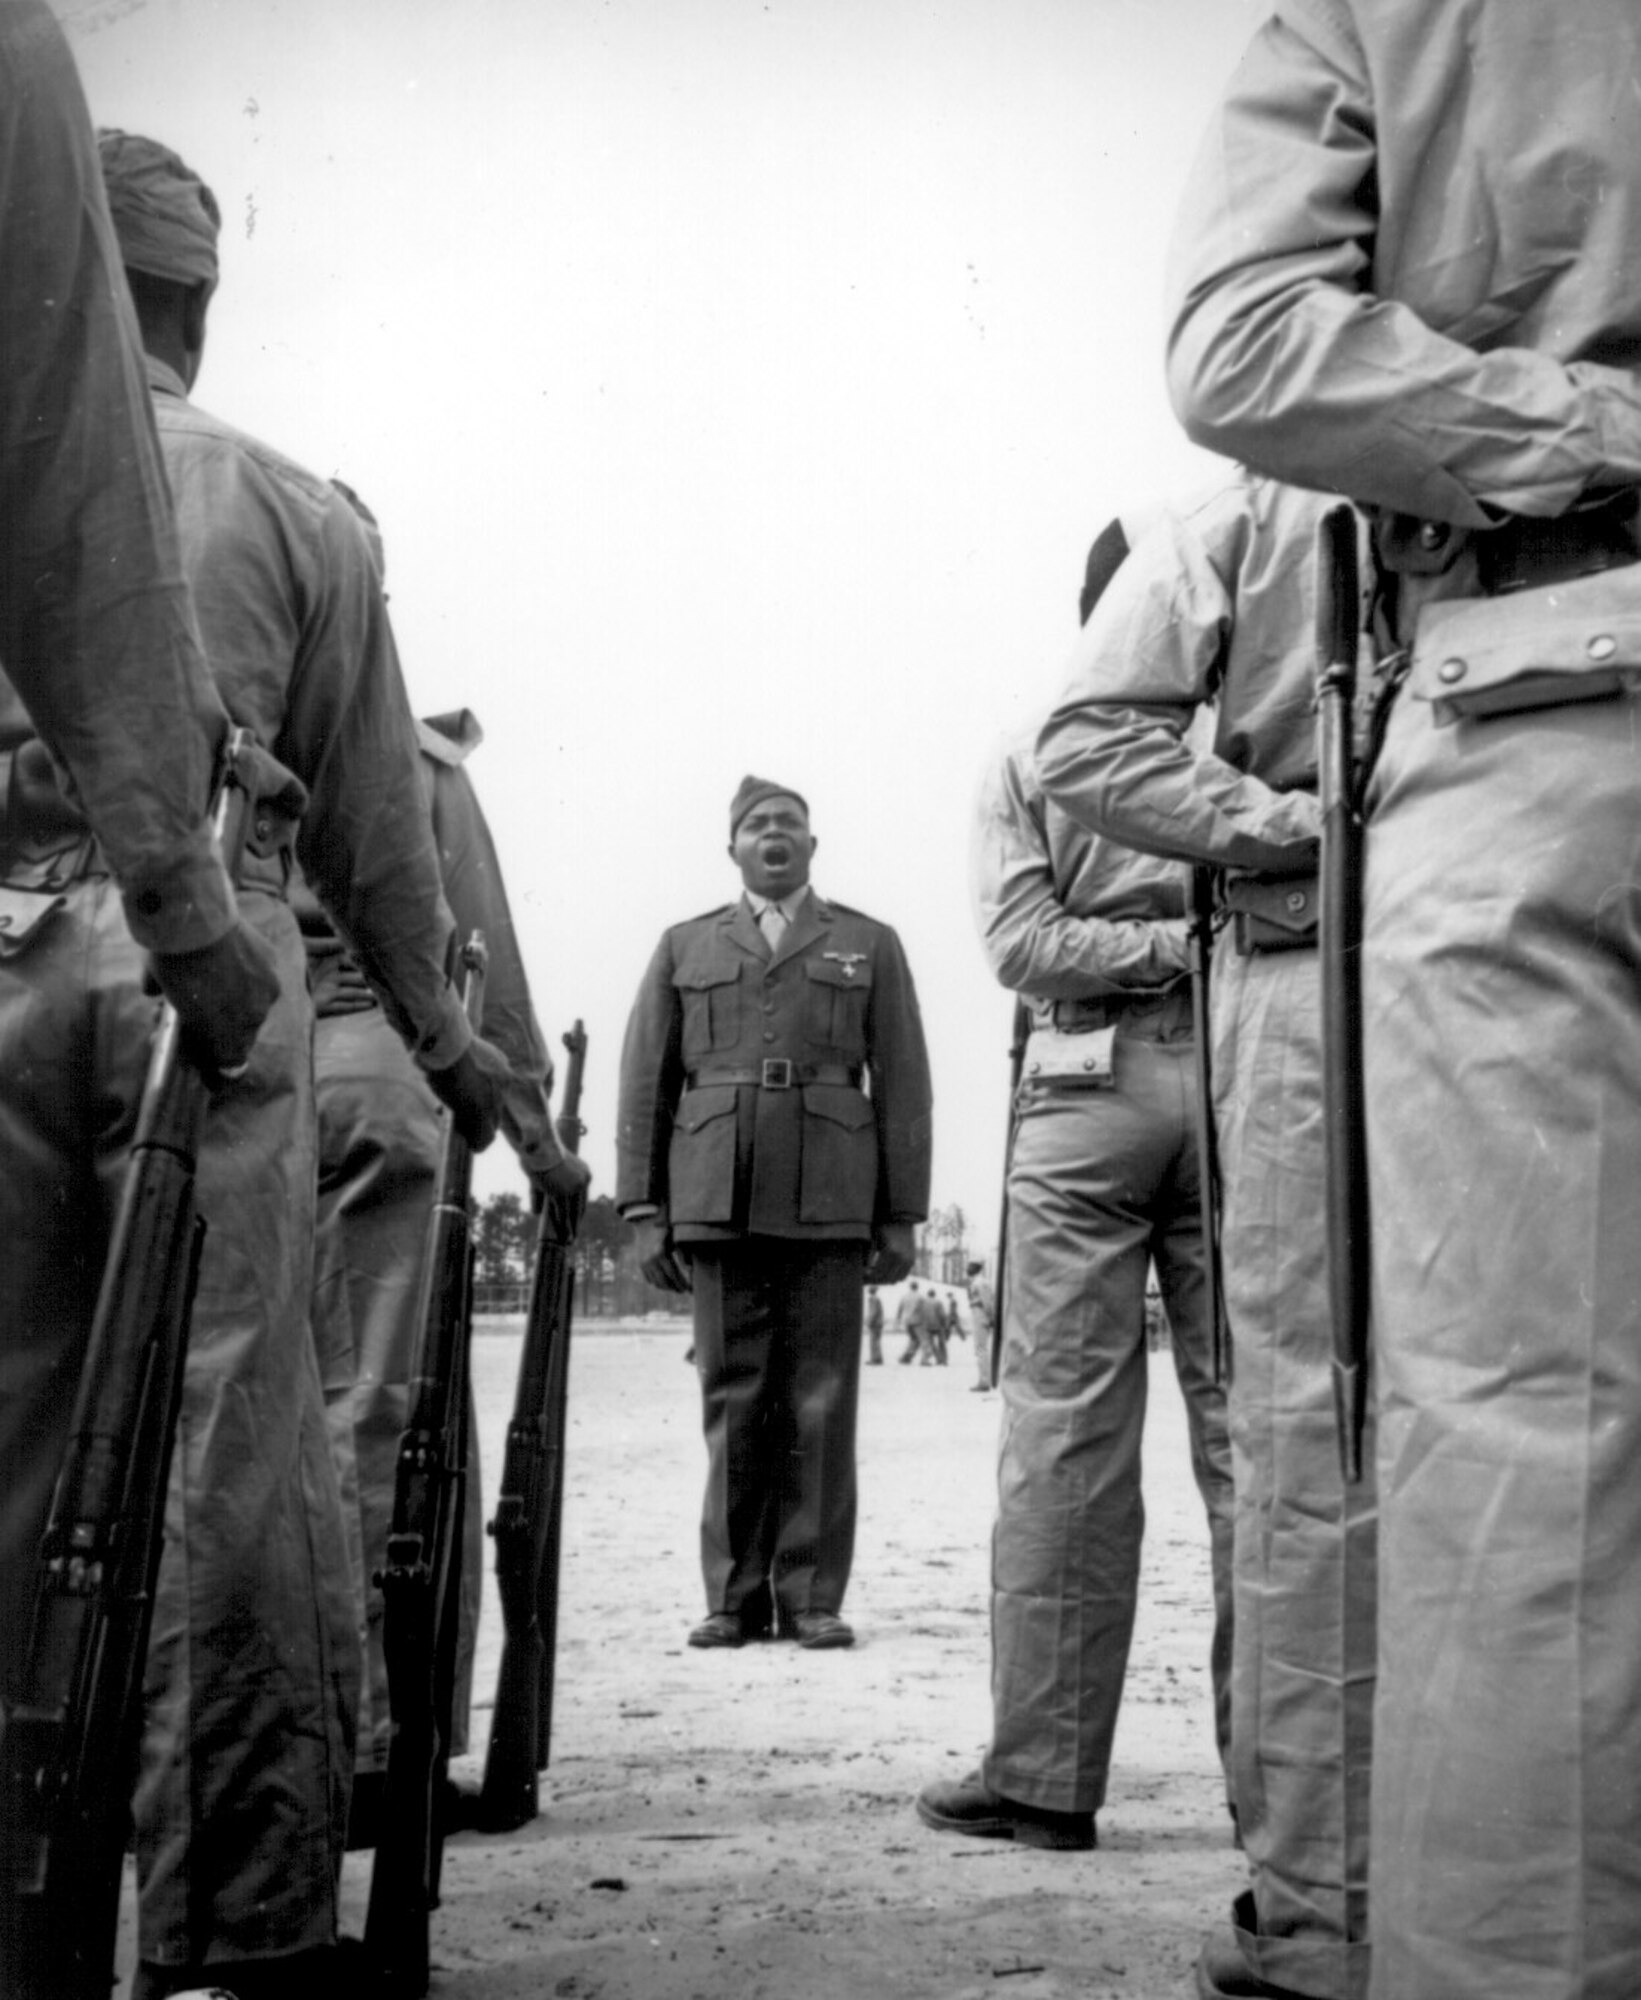 A U.S. Marine drill instructor addresses his platoon during basic training at Camp Montford Point, N.C. In 1942, then-president Franklin D. Roosevelt established a presidential directive giving African-Americans the opportunity to enlist in the Marine Corps for the first time since its founding in 1775. (Courtesy photo/Released)